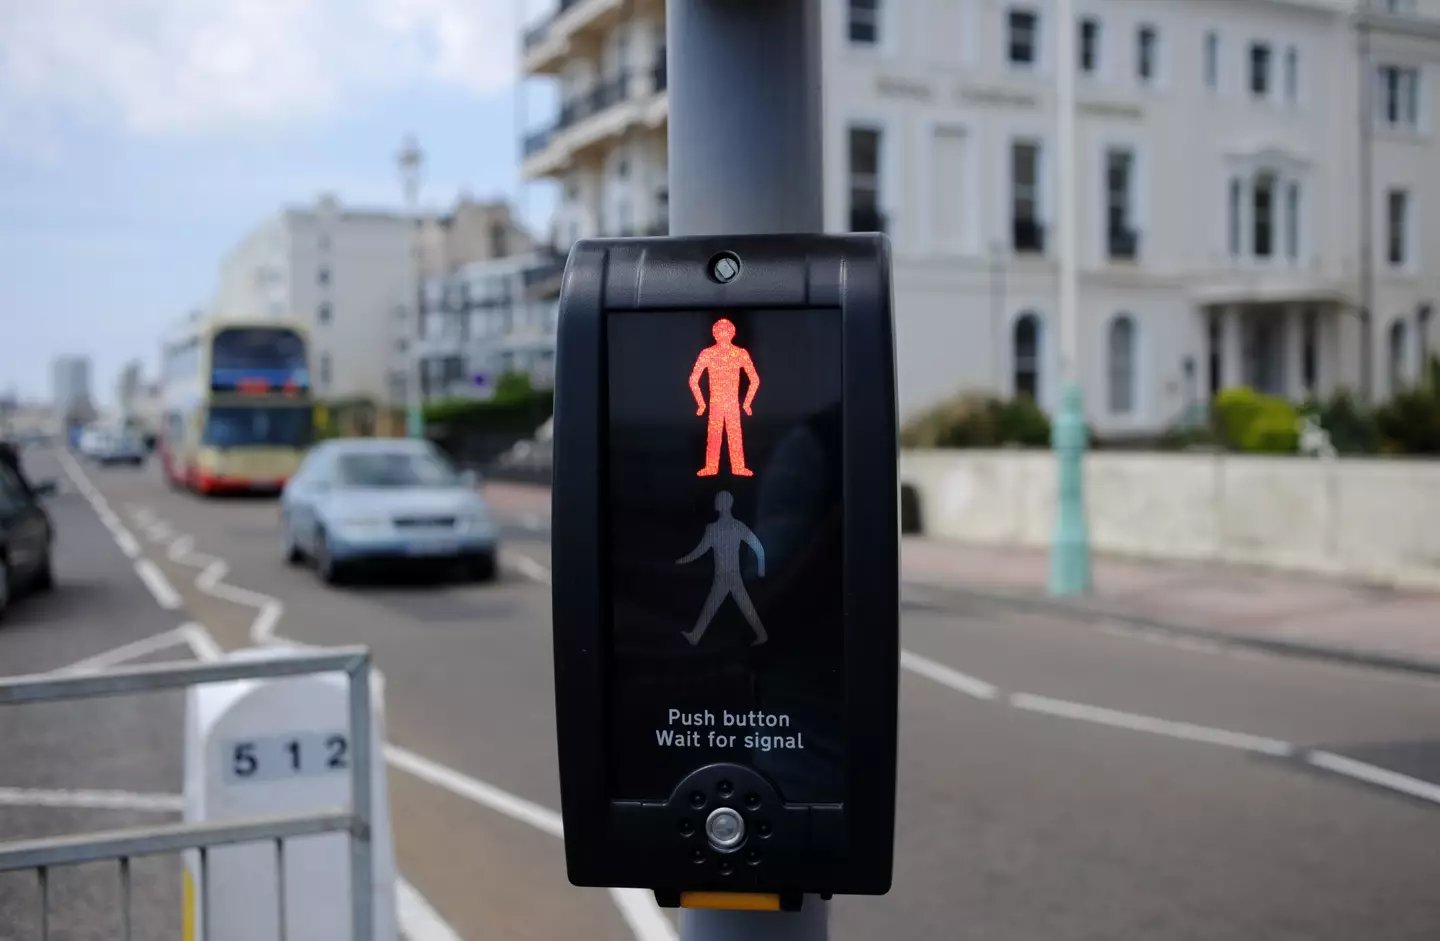 A puffin crossing, which is not named after the bird.